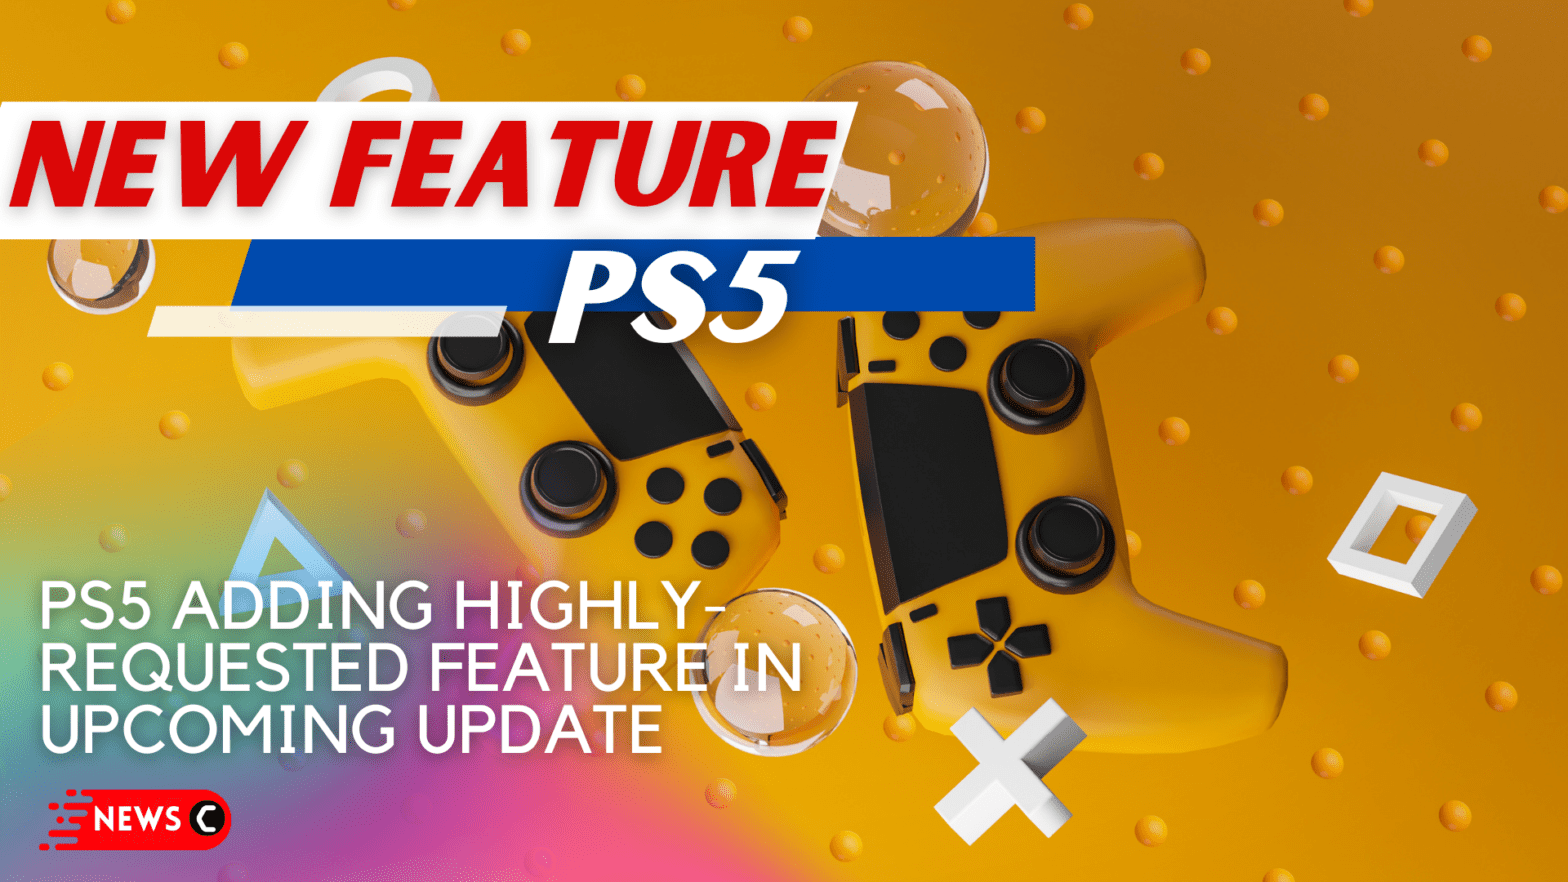 PS5 Adding Highly-Requested Feature in Upcoming Update